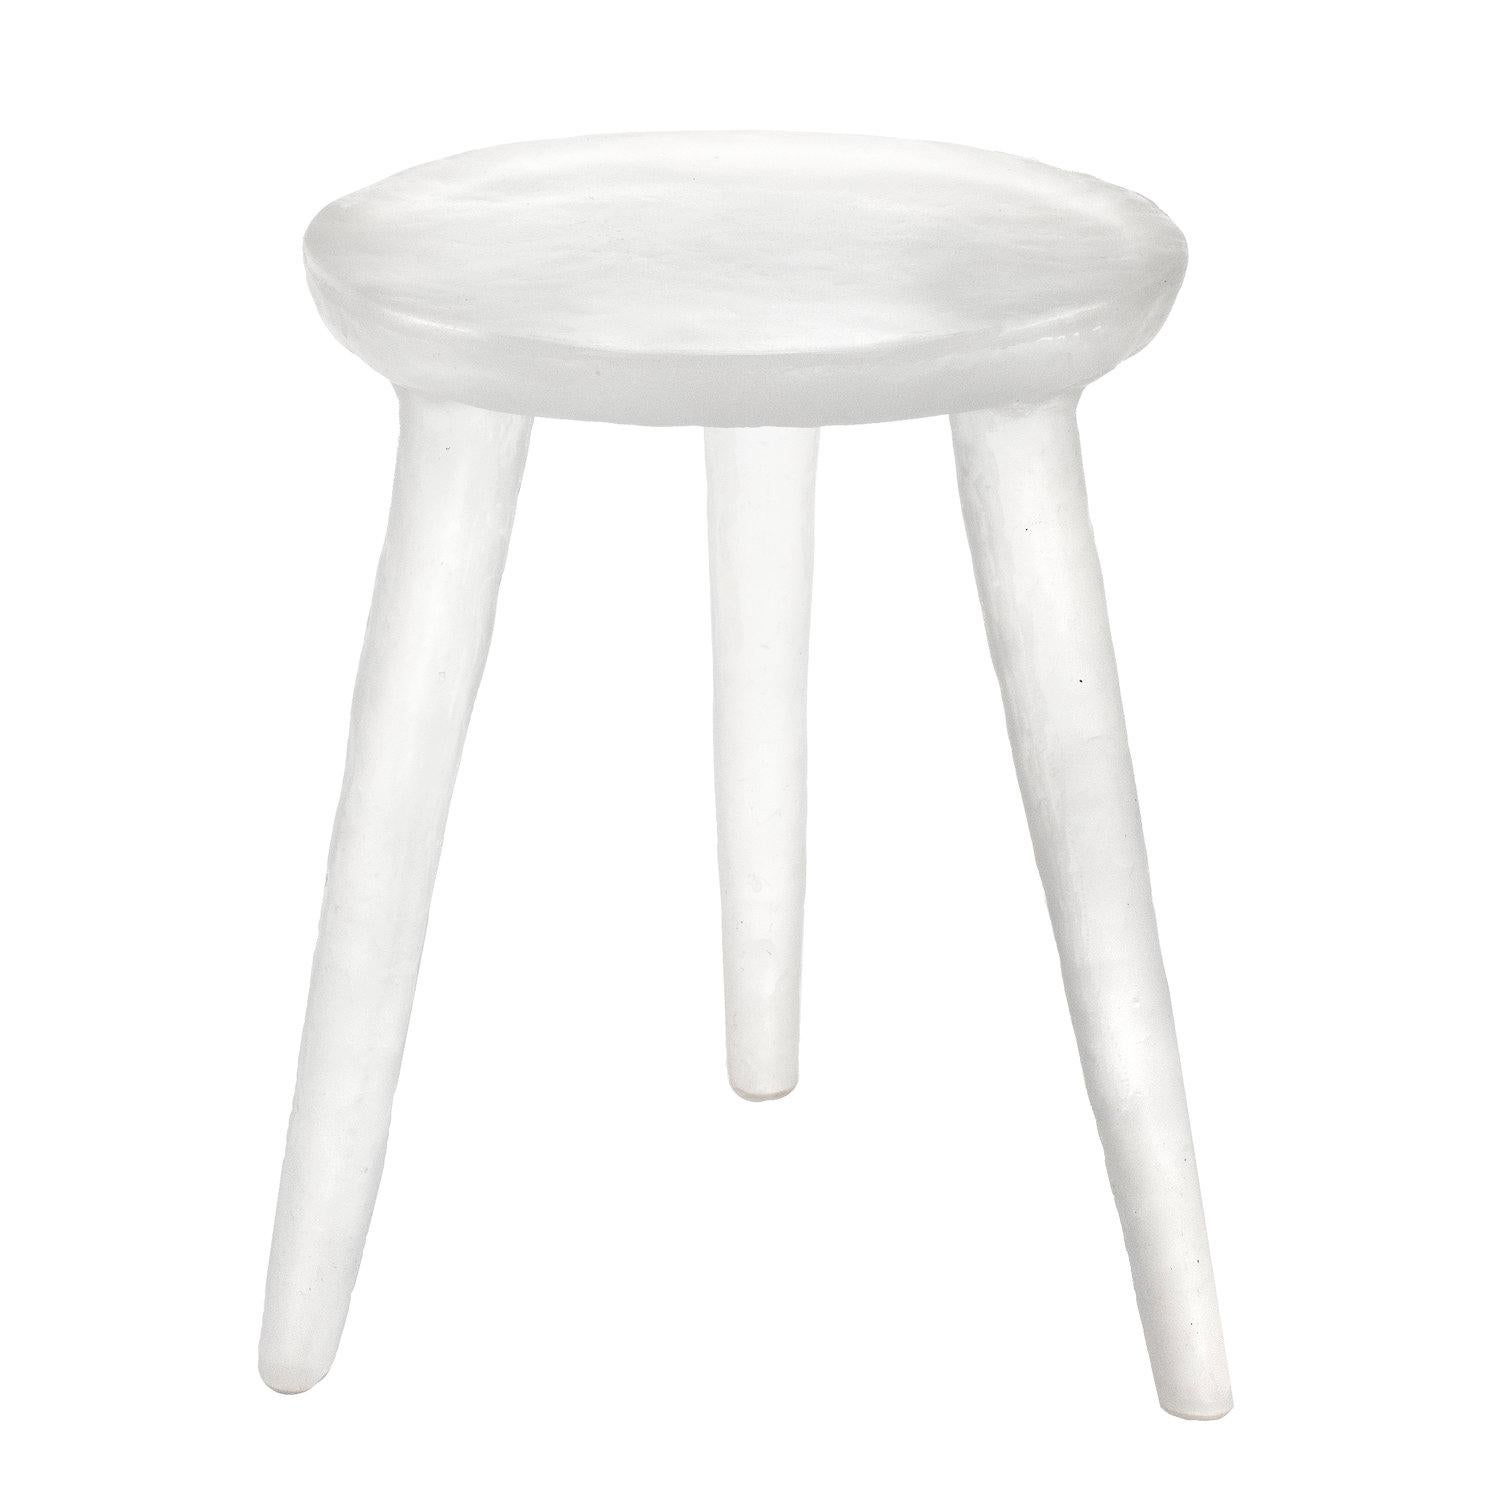 Translucent and whimsical, the Glow side table or stool can be used as a side table or stool. They are handcrafted from a variety of recycled plastics both thermoset and thermoplastic. A specific blend of the plastics is combined in large molds.